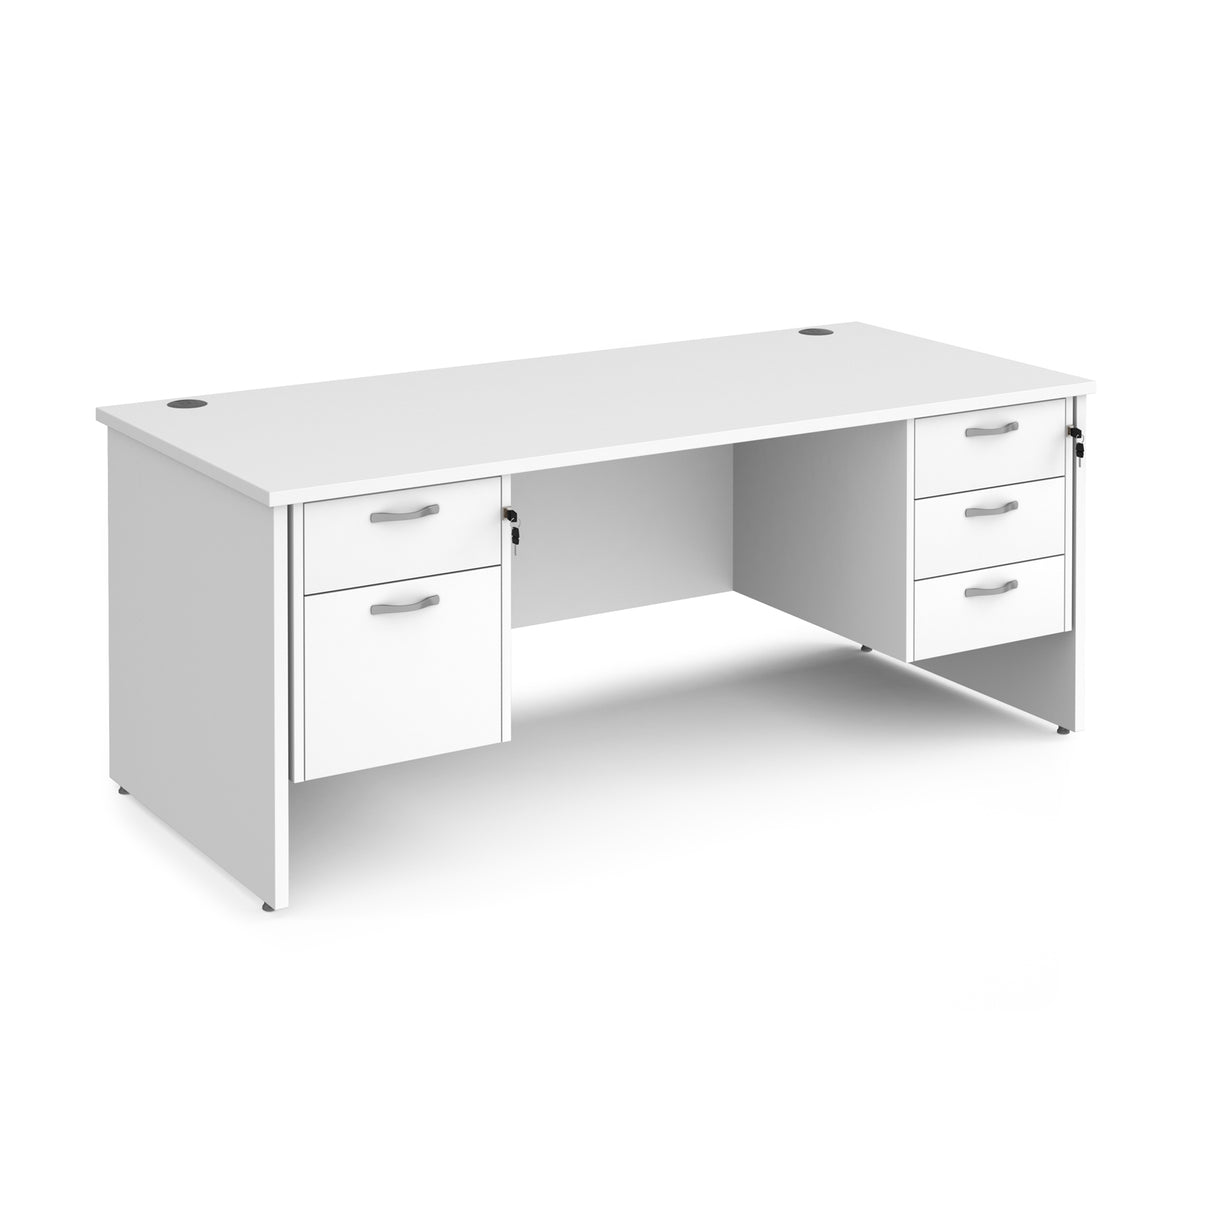 Maestro 800mm Deep Straight Panel Leg Office Desk with Two and Three Drawer Pedestal